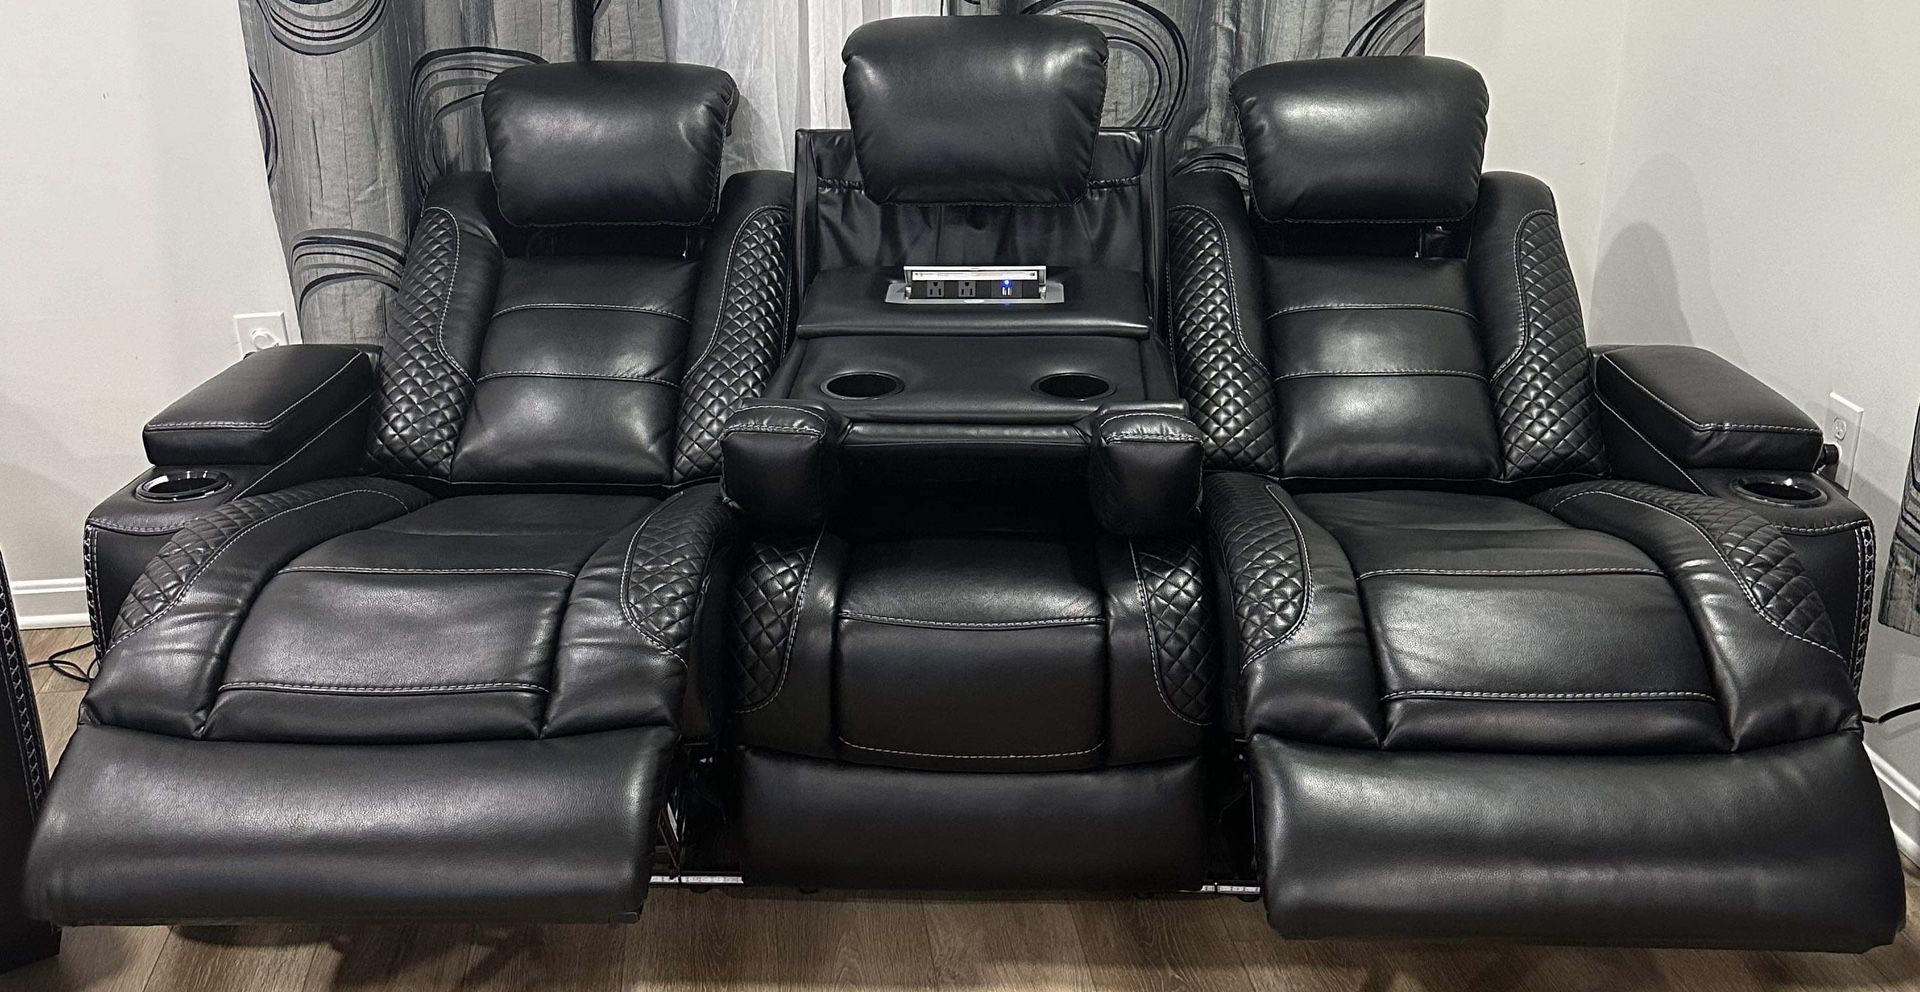 Used- Like New Black Leather Couch With Lighting And Charger Built In